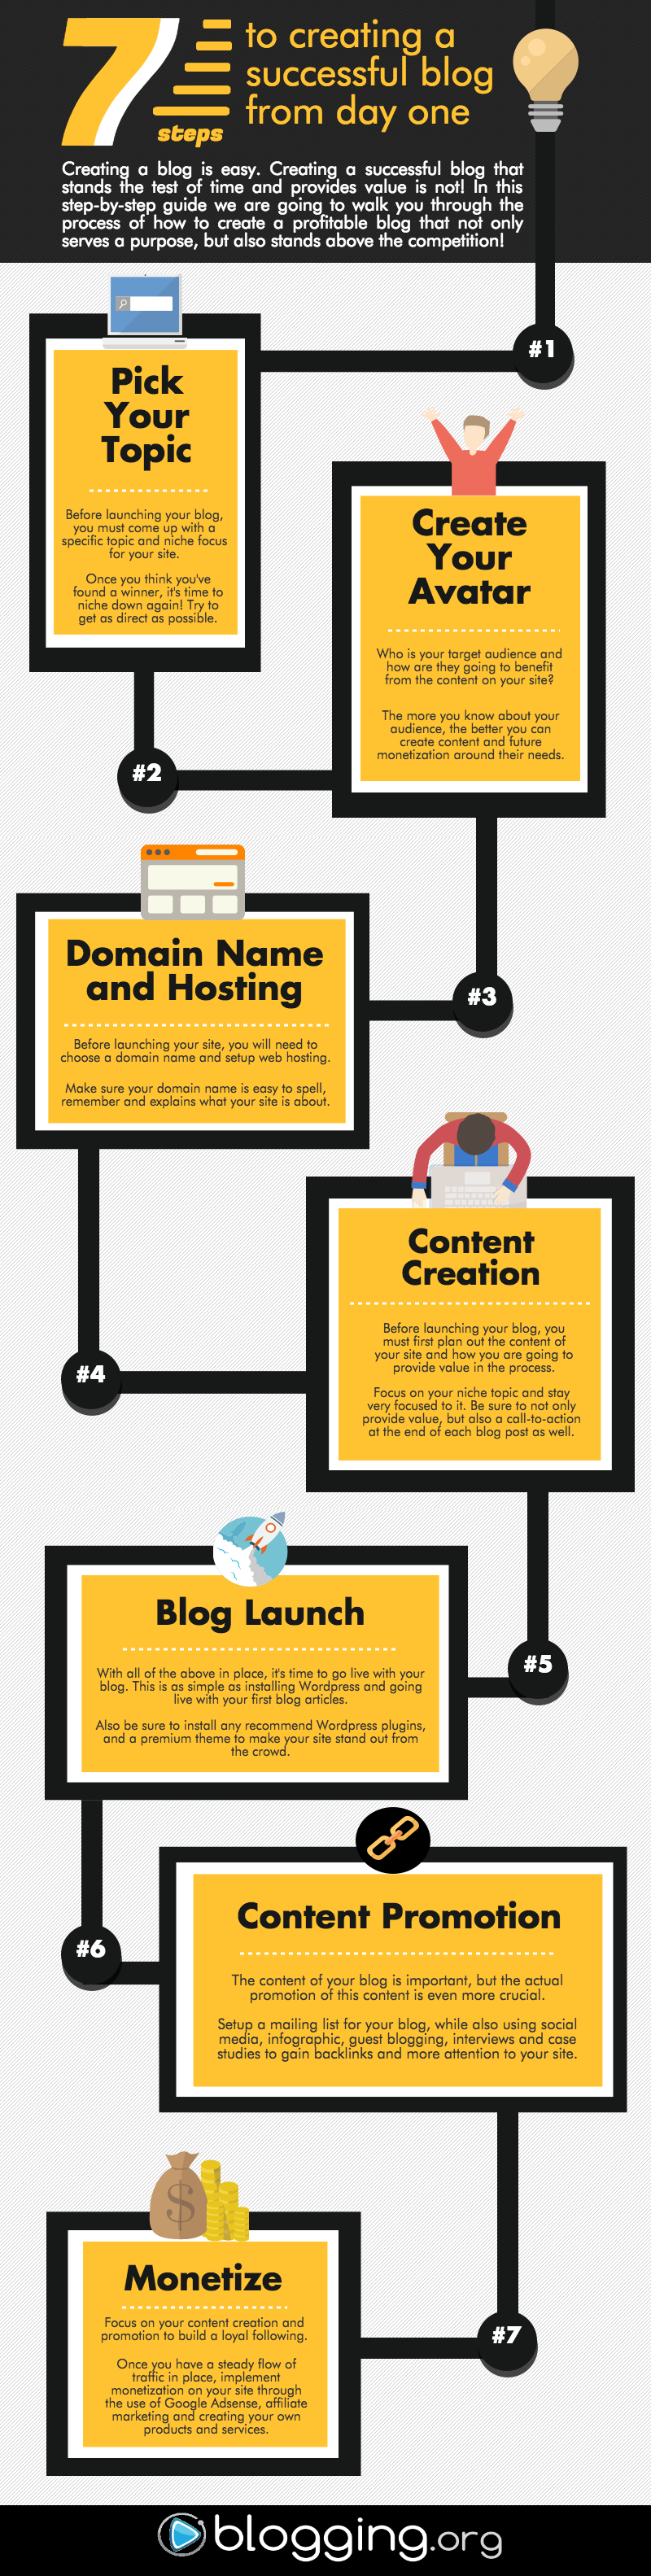 How-to-Create-a-Successful-Blog Infographic